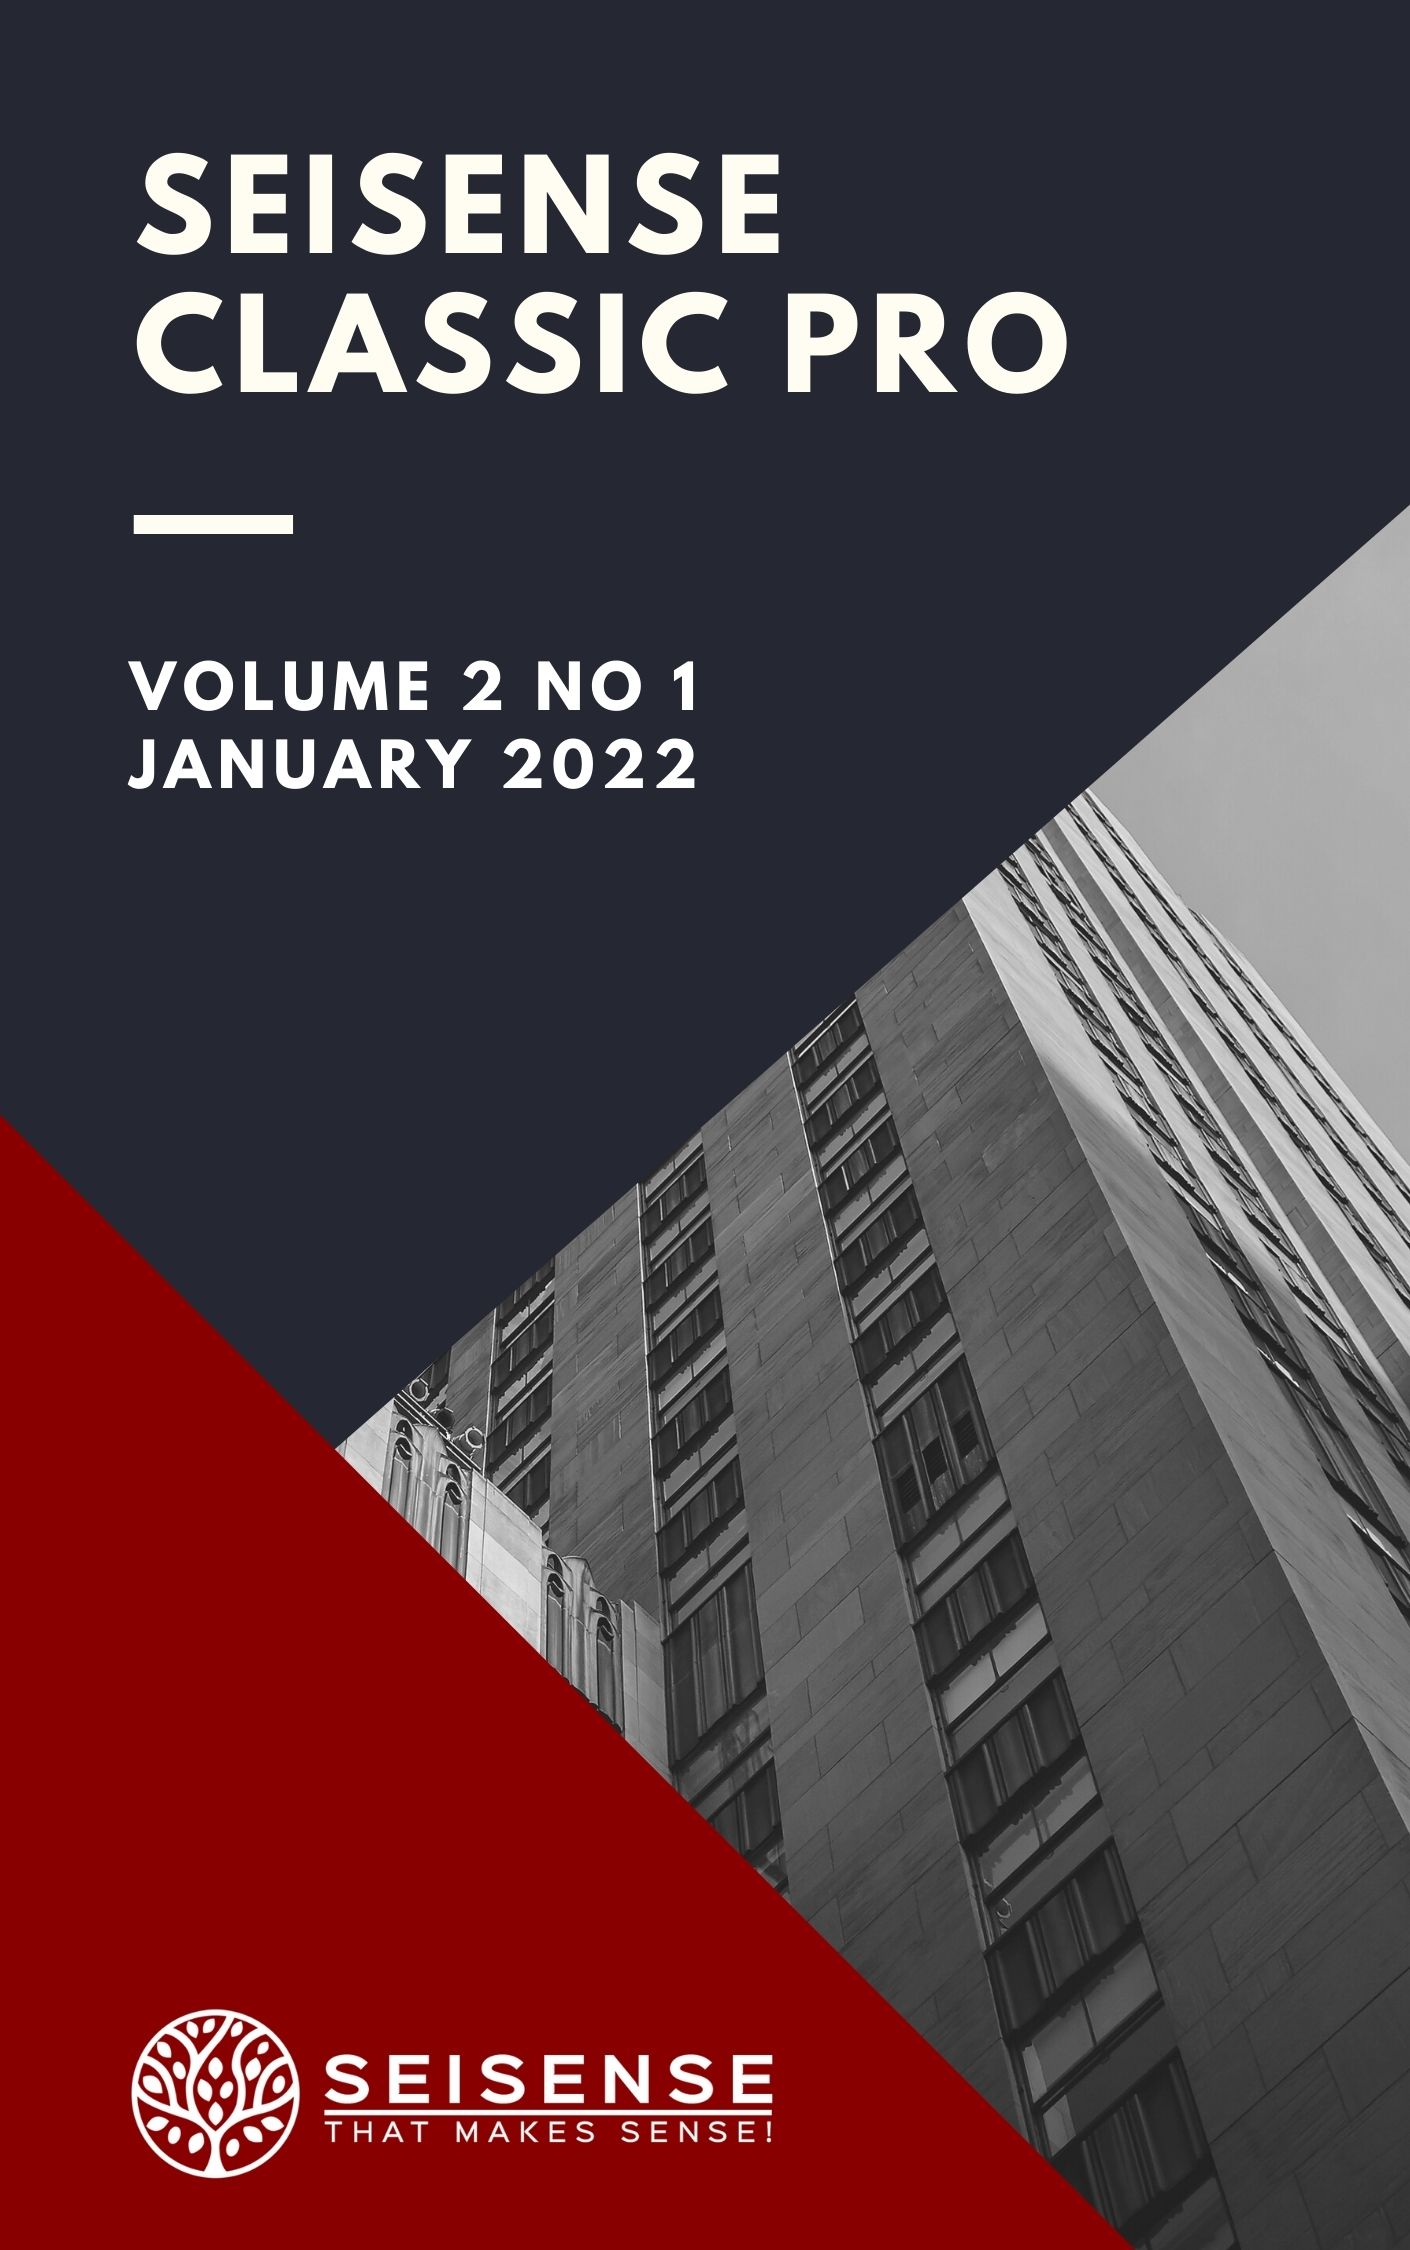 					View Vol. 1 No. 1 (2020): Classic Pro Red Journal
				